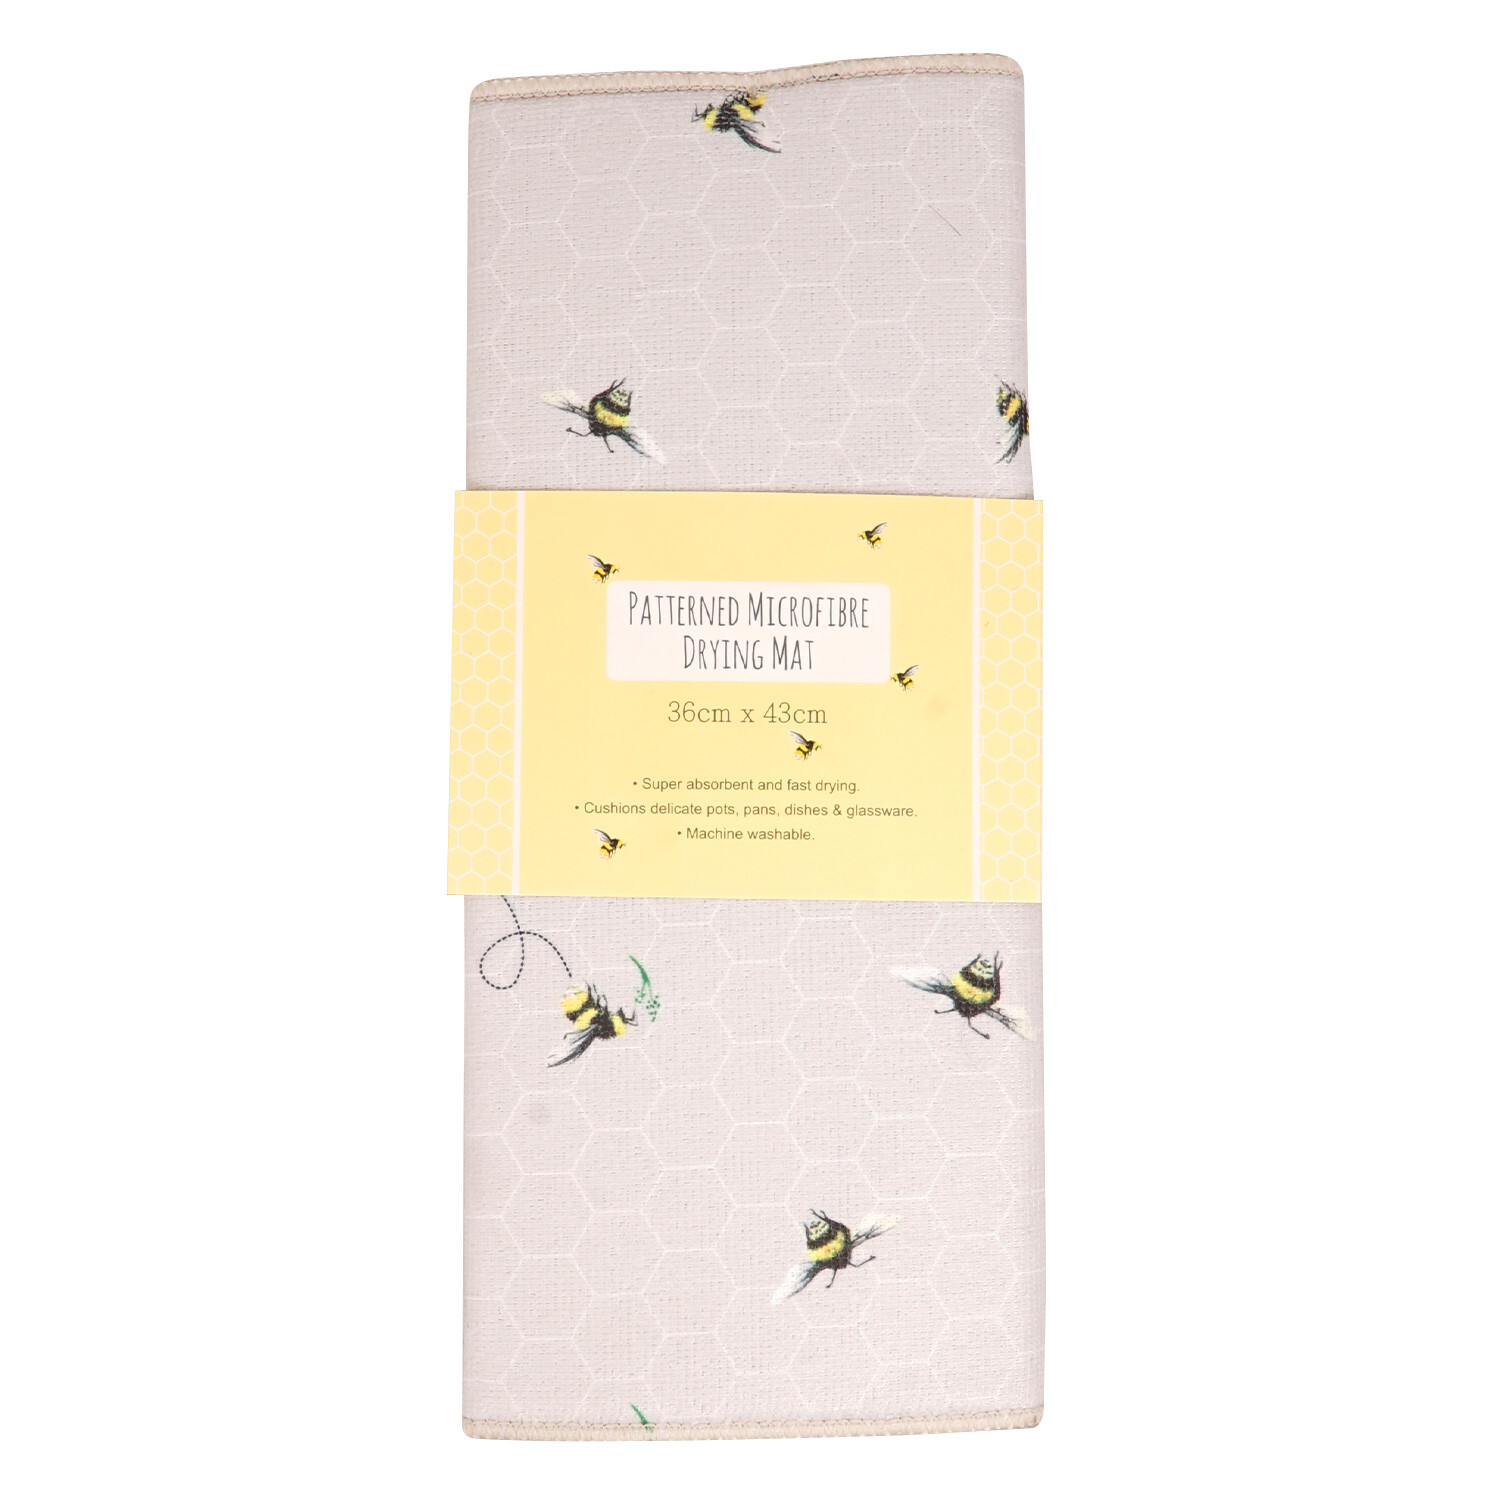 Bee Patterned Microfibre Drying Mat - Neutral Image 1